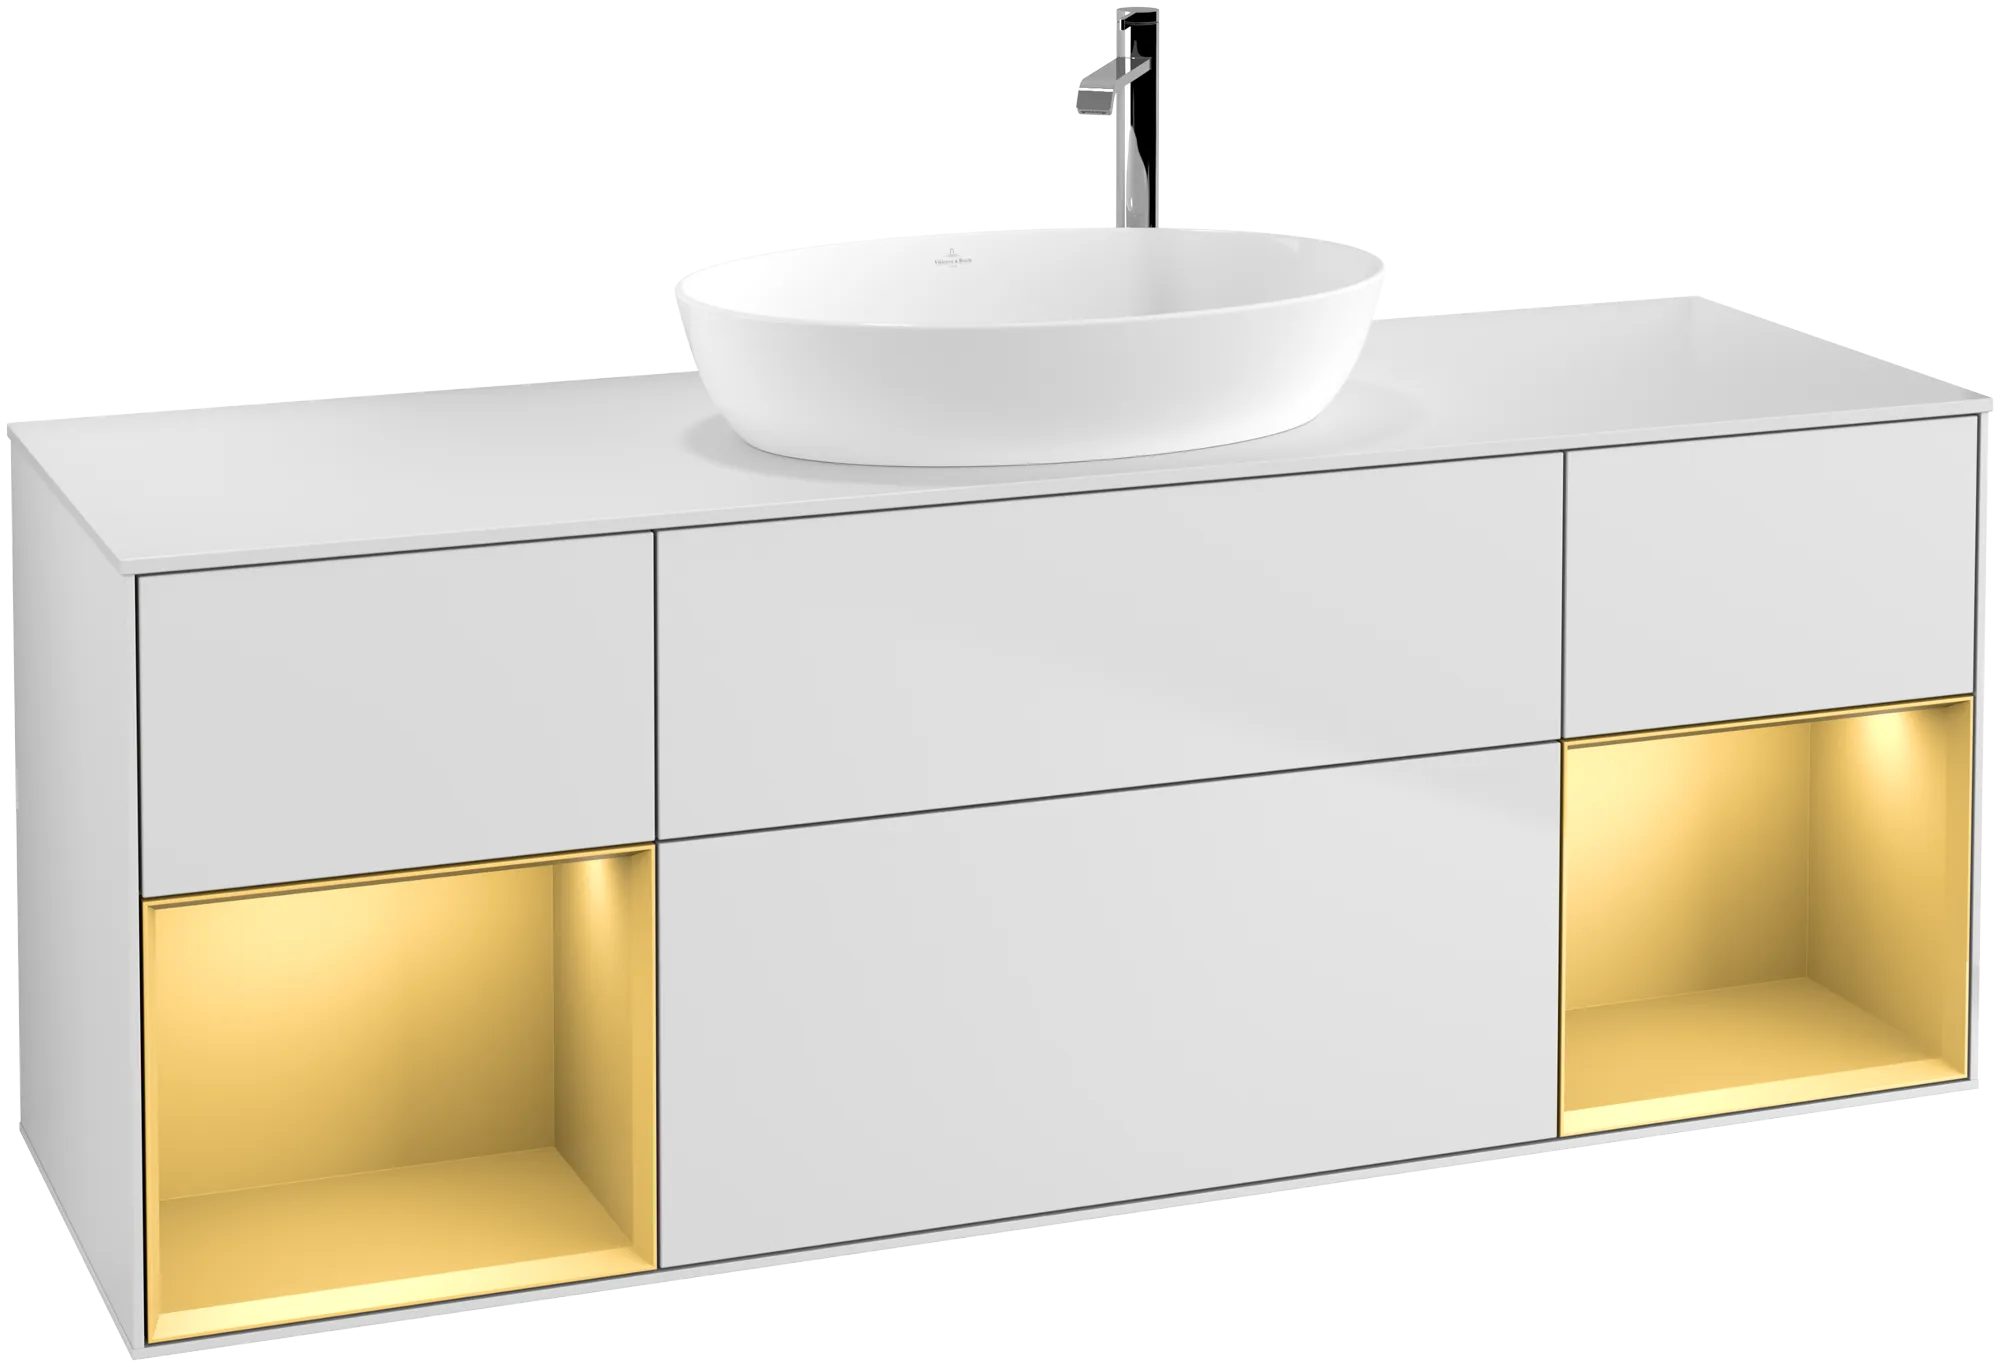 VILLEROY BOCH Finion Vanity unit, with lighting, 4 pull-out compartments, 1600 x 603 x 501 mm, White Matt Lacquer / Gold Matt Lacquer / Glass White Matt #G981HFMT resmi